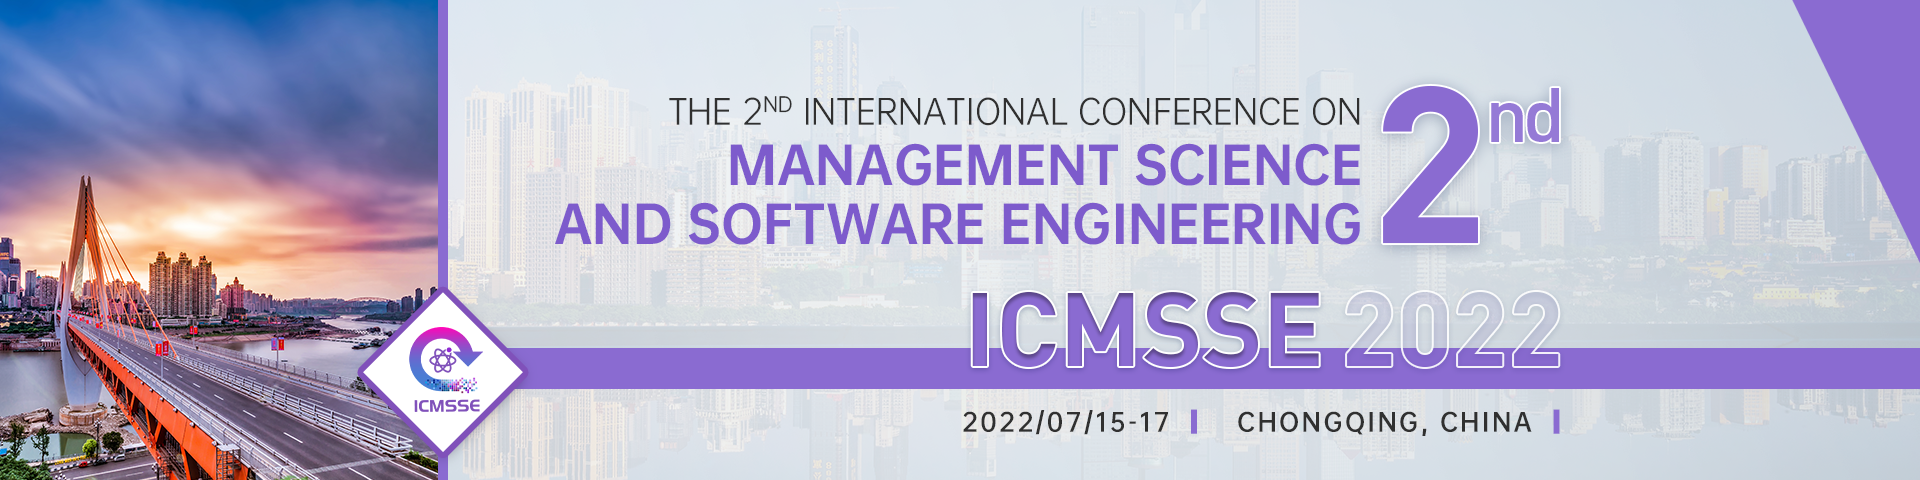 2nd International Conference on Management Science and Software Engineering (ICMSSE 2022), Chongqing, China